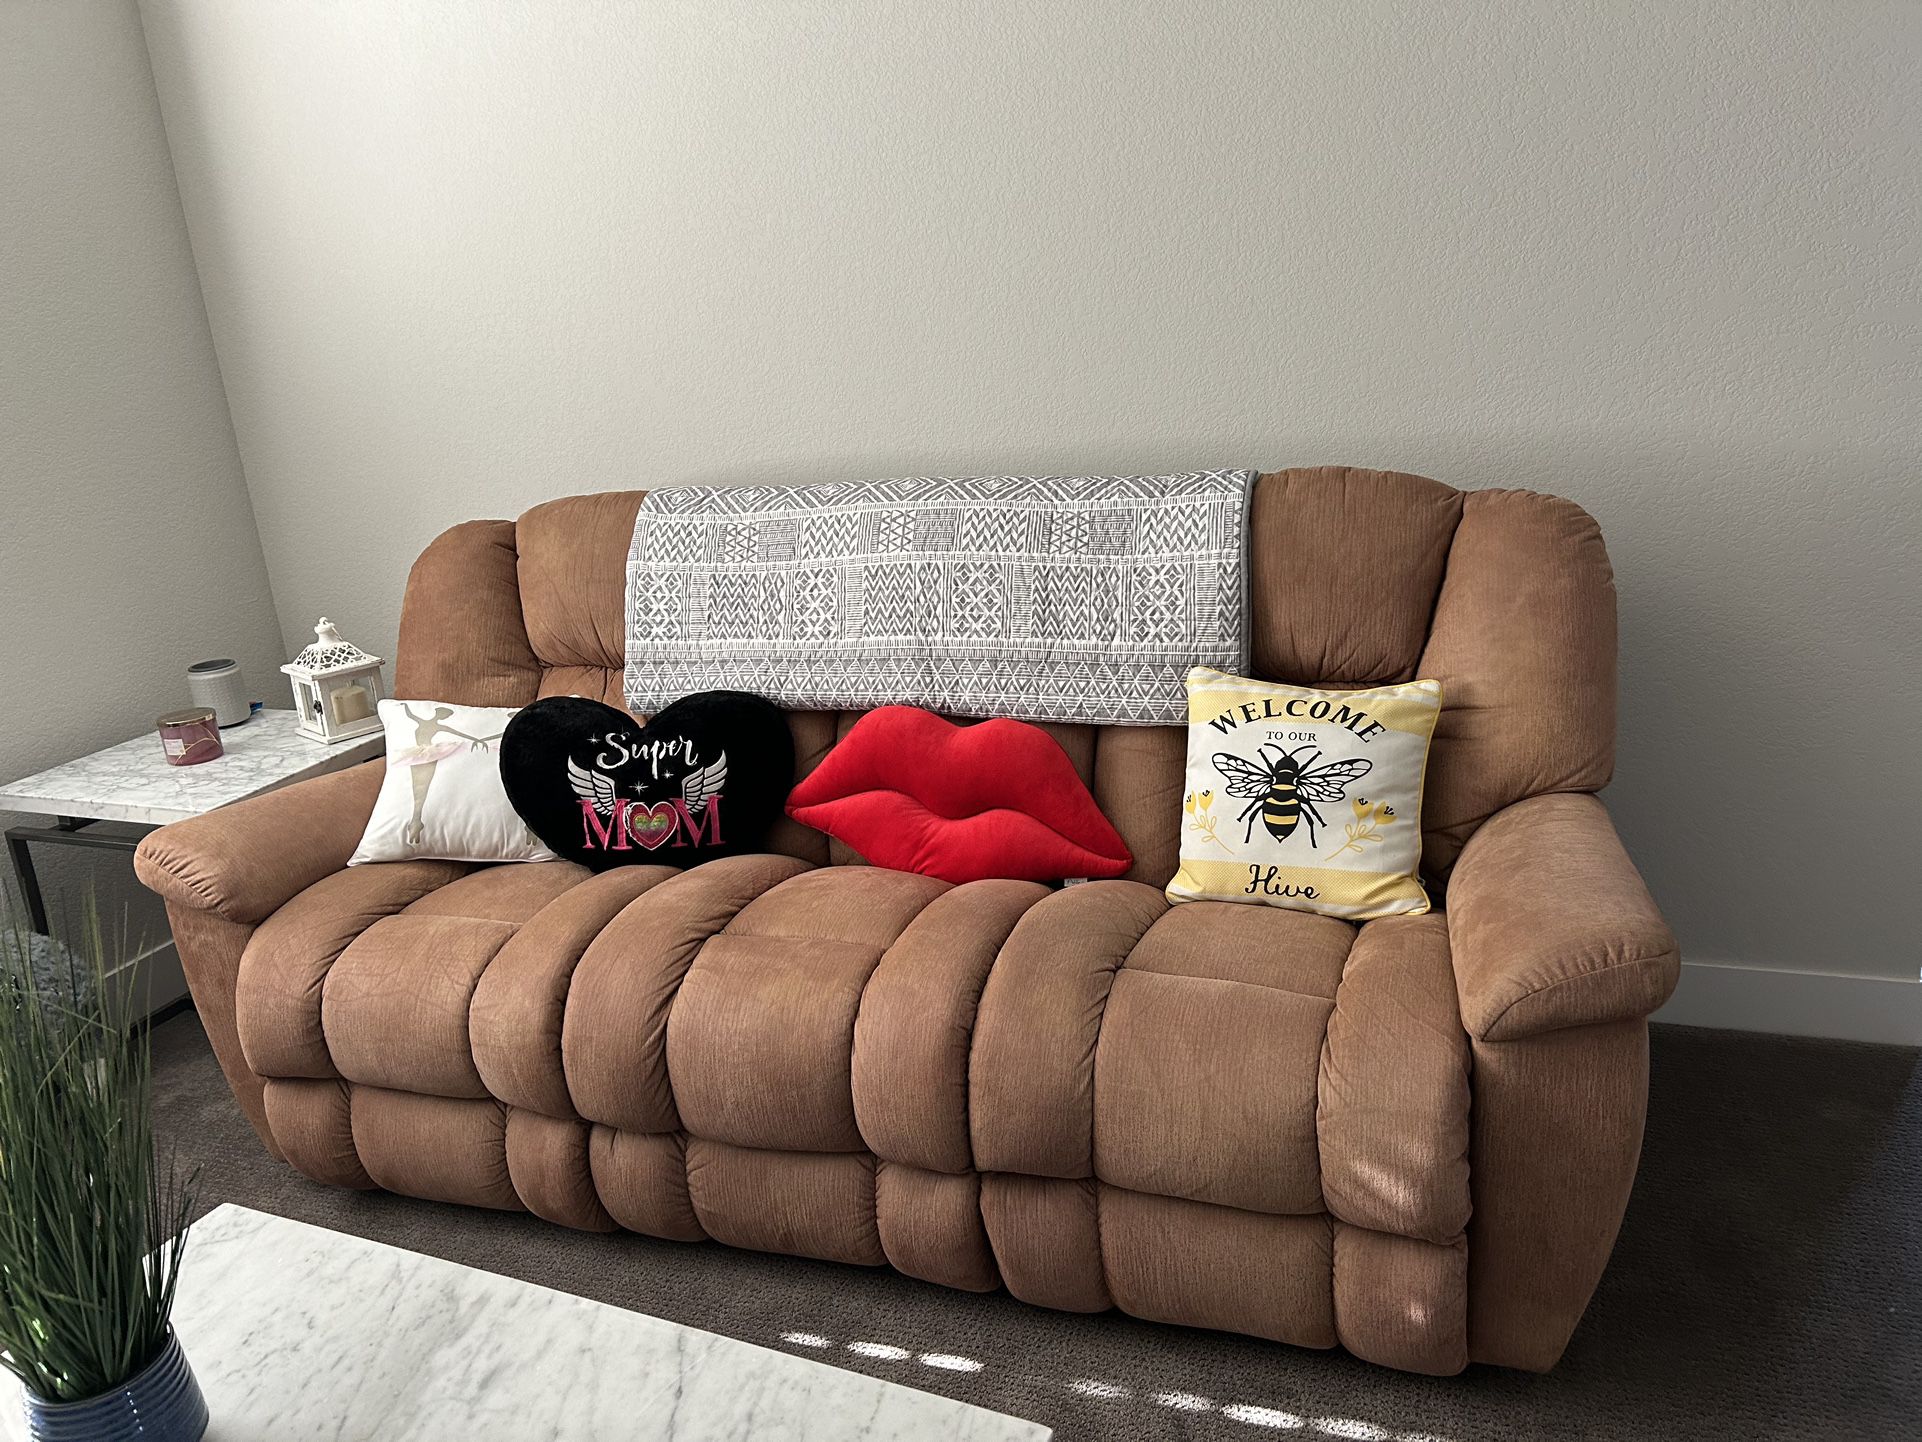 Lazy Boy Recliner Couch